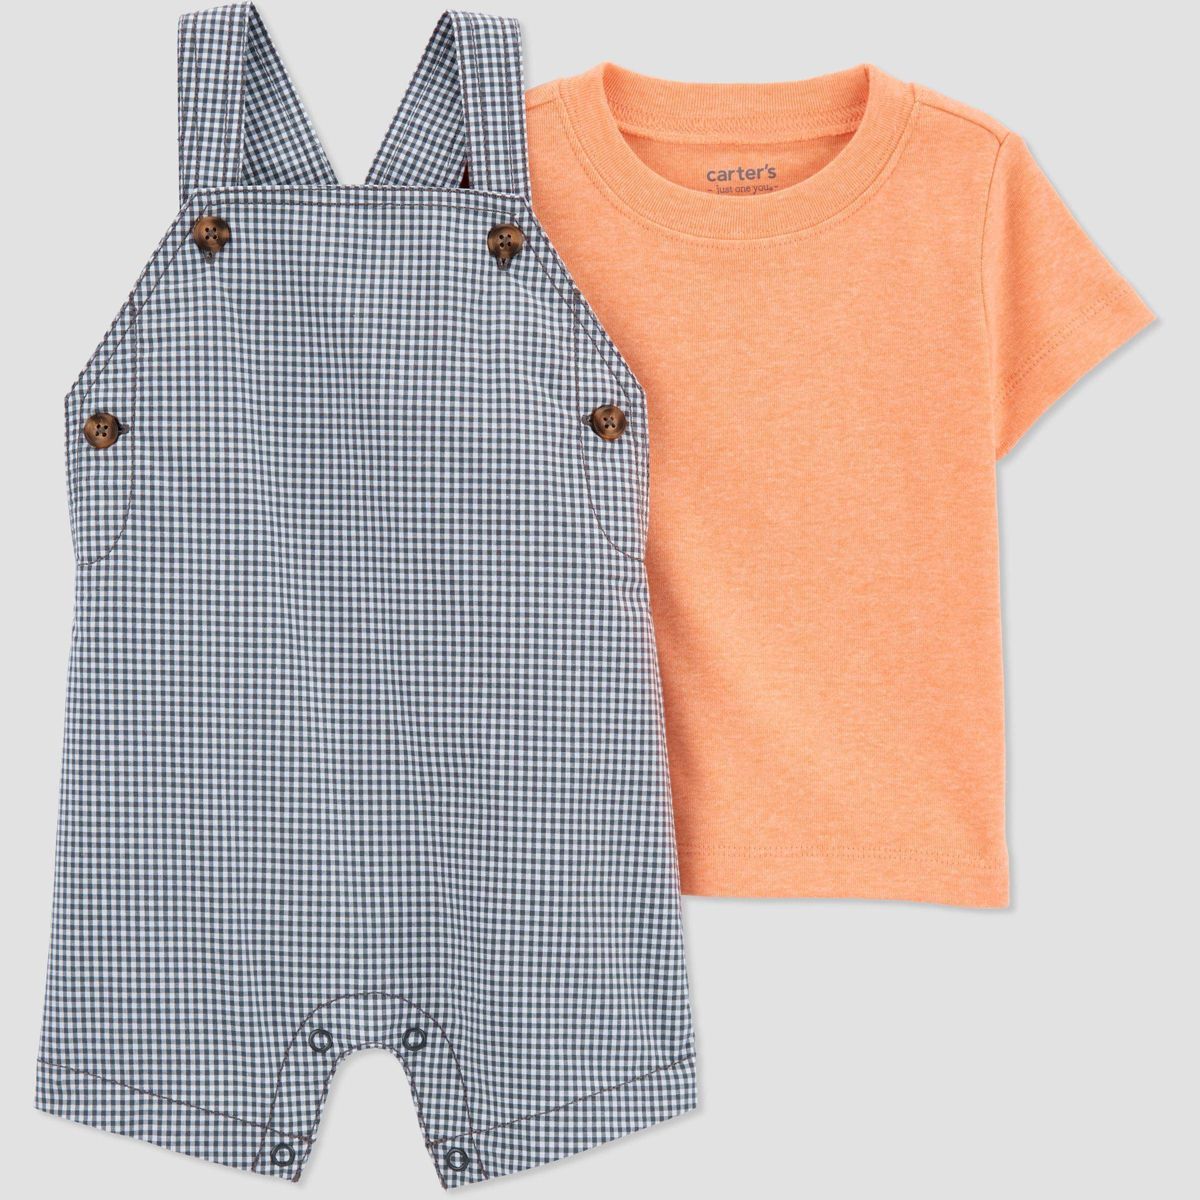 Carter's Just One You® Baby Boys' Gingham Overalls - Orange | Target